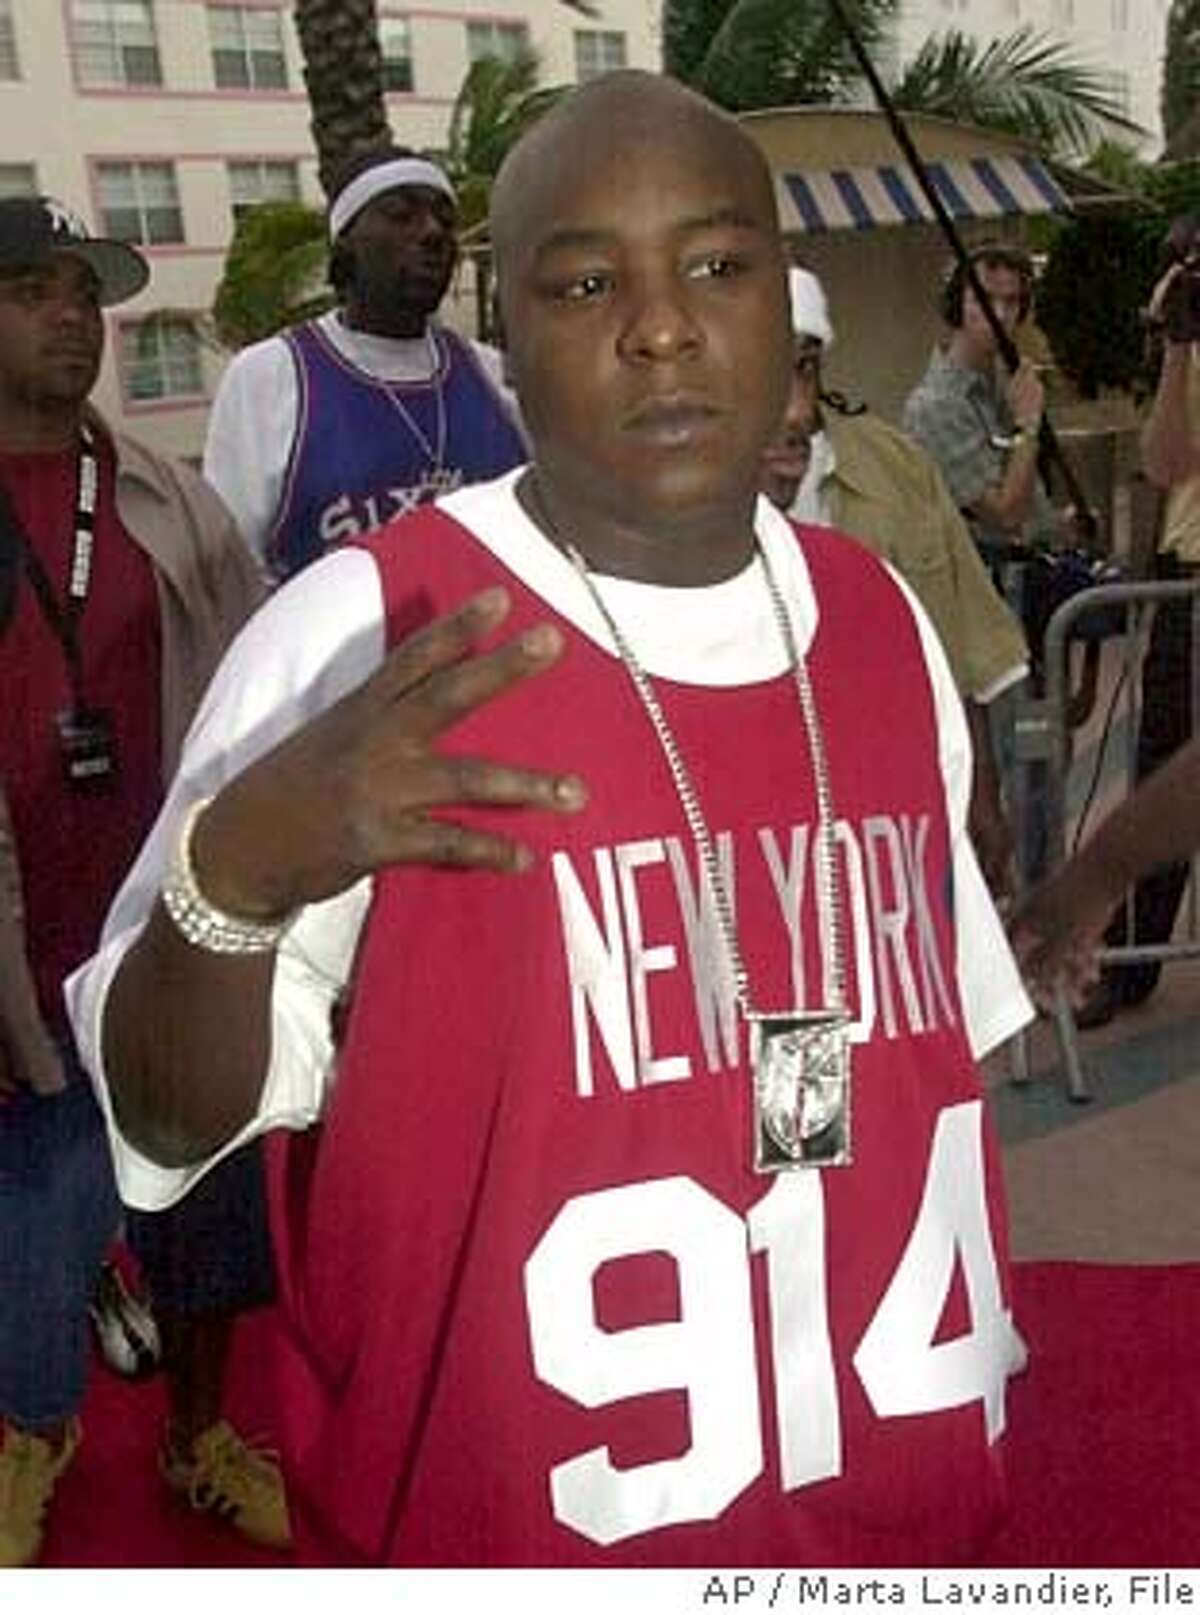 **FILE** Rapper Jadakiss arrives at the 2002 Billboard R&B/Hip-Hop Awards in this Aug. 9, 2002, file photo in Miami Beach. Jadakiss has been indicted on gun and drug charges. On Thursday, Feb. 8, 2007, he entered a not guilty plea to charges of possessing a loaded handgun and marijuana. (AP Photo/Marta Lavandier, File) AN AUG. 9, 2002 FILE PHOTO